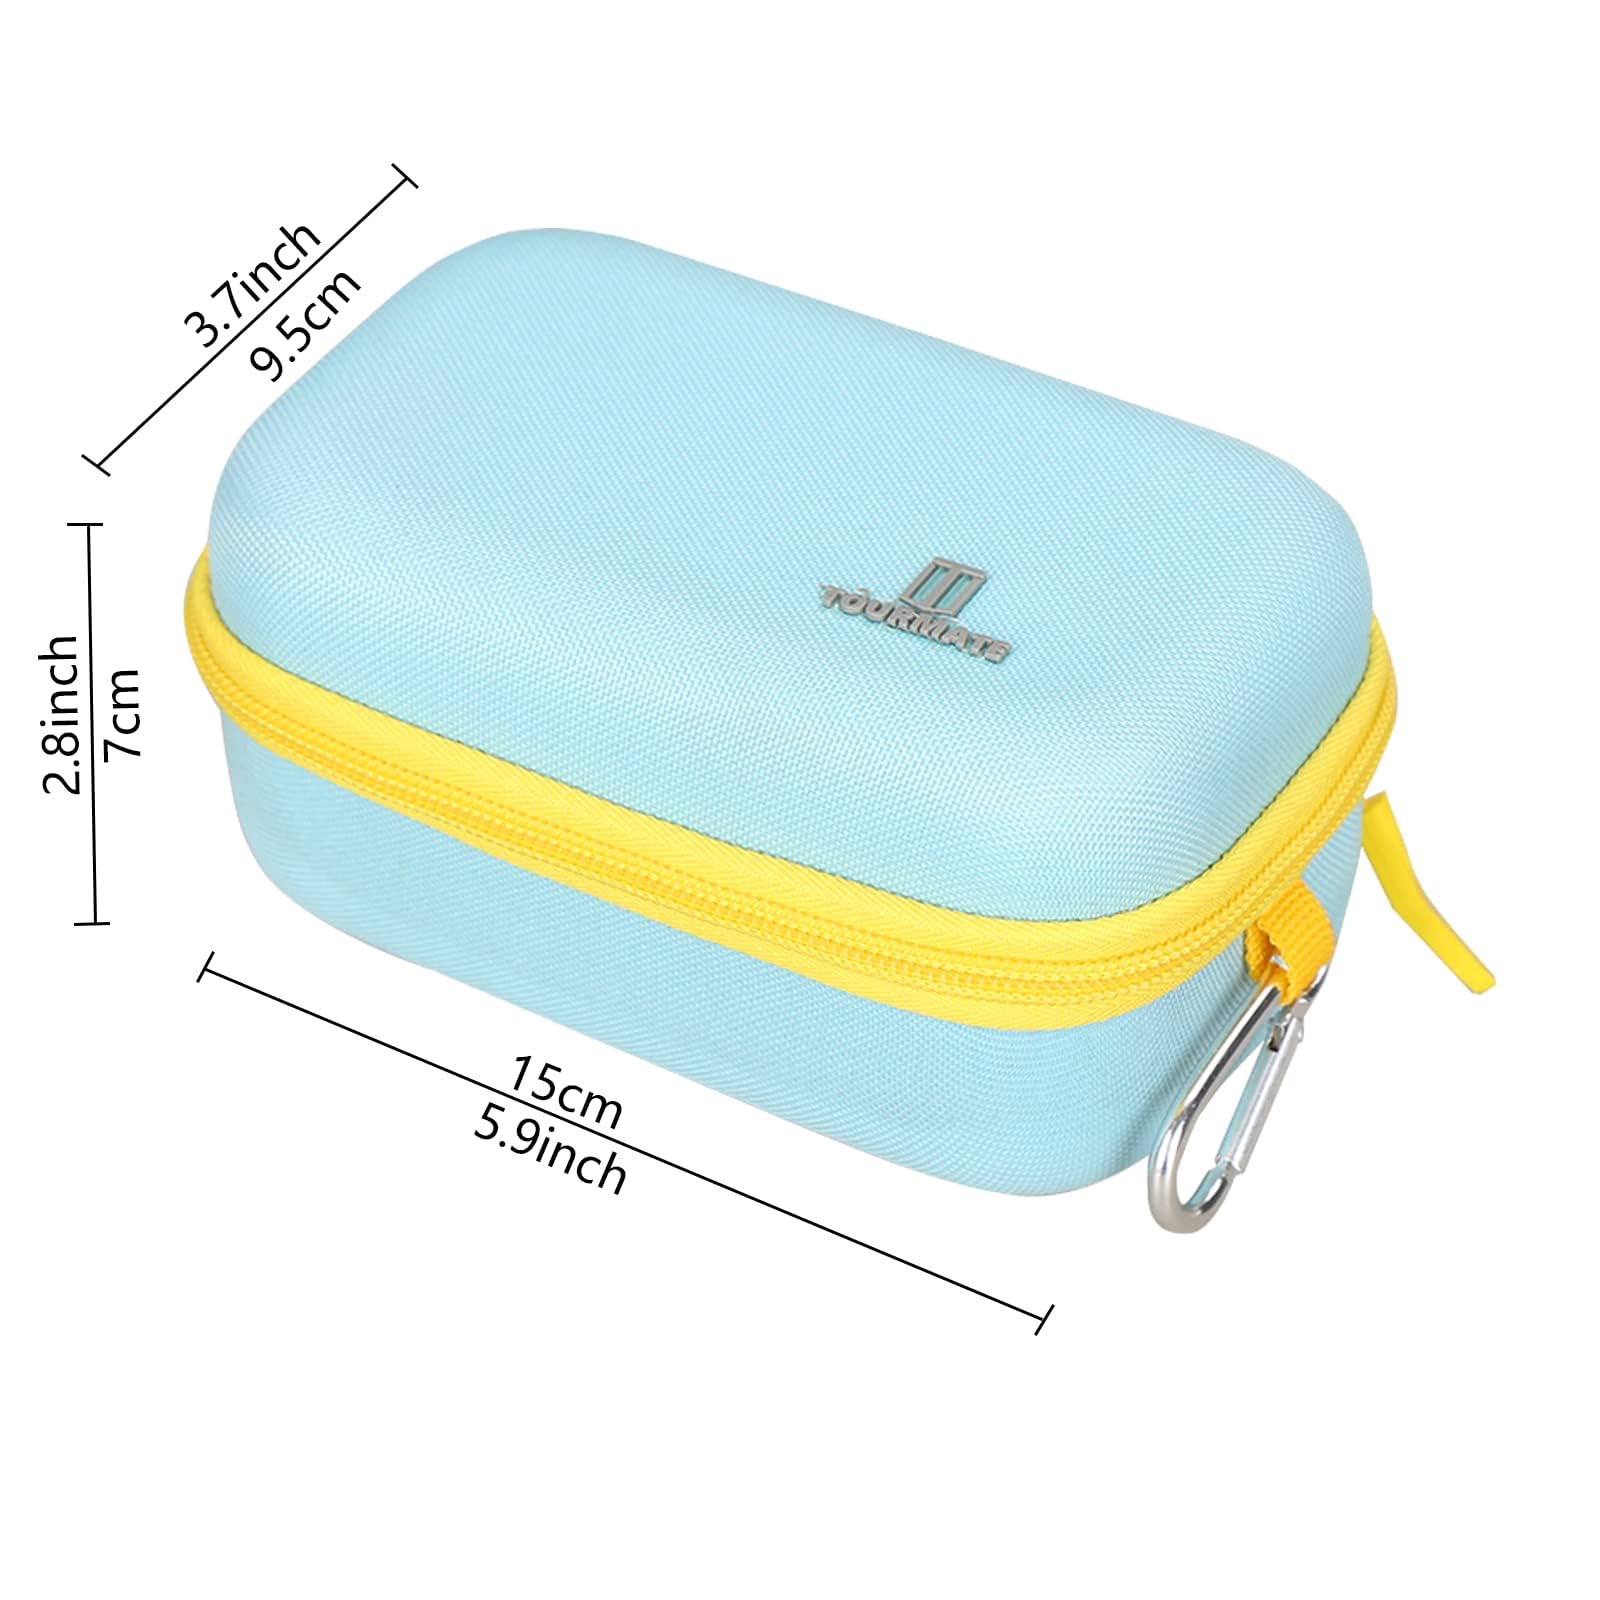 Tourmate Hard Case Compatible for Moonlite Mini Projector and Story Reels, Storybook Projector Protective Storage Shell